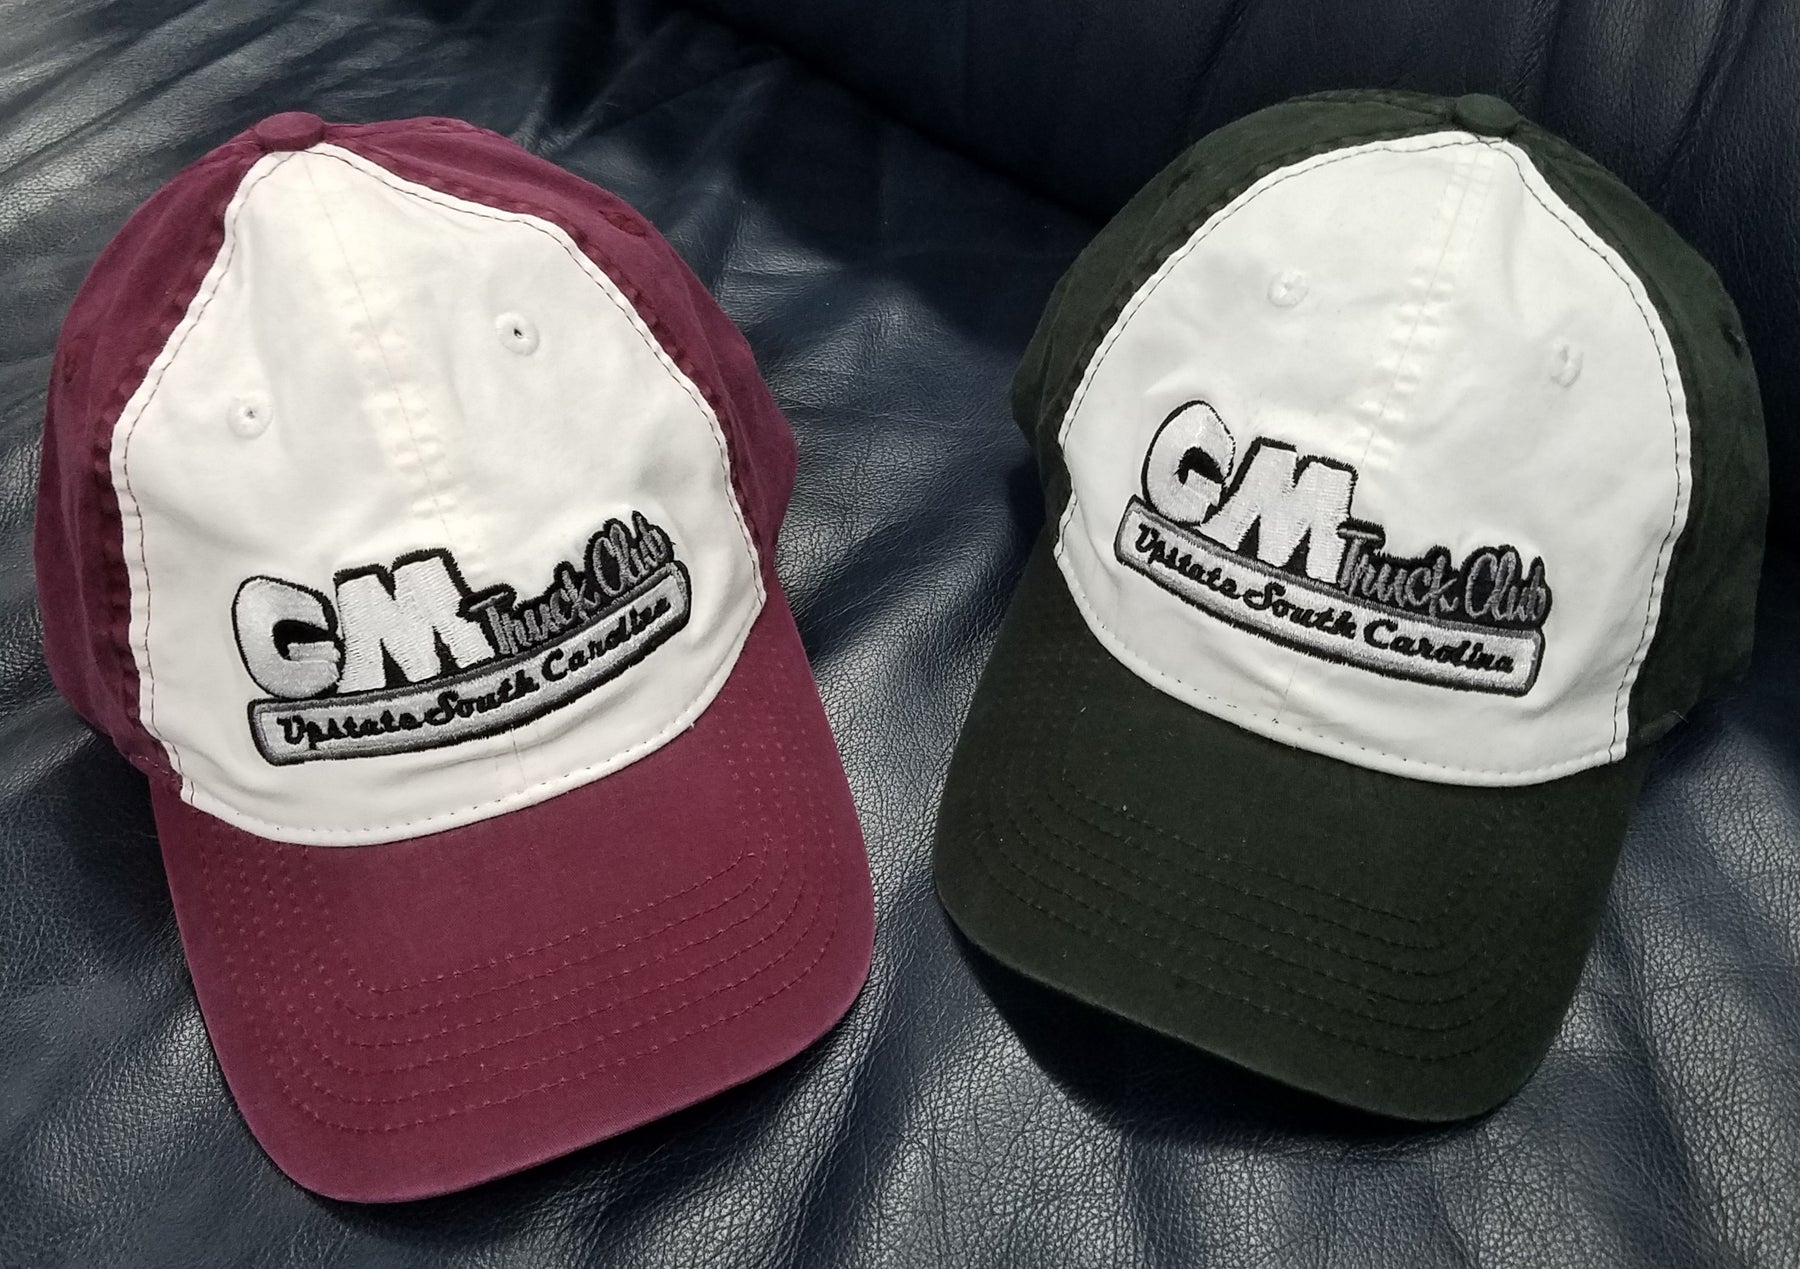 Upstate SC GM Truck Club Low Profile Hat